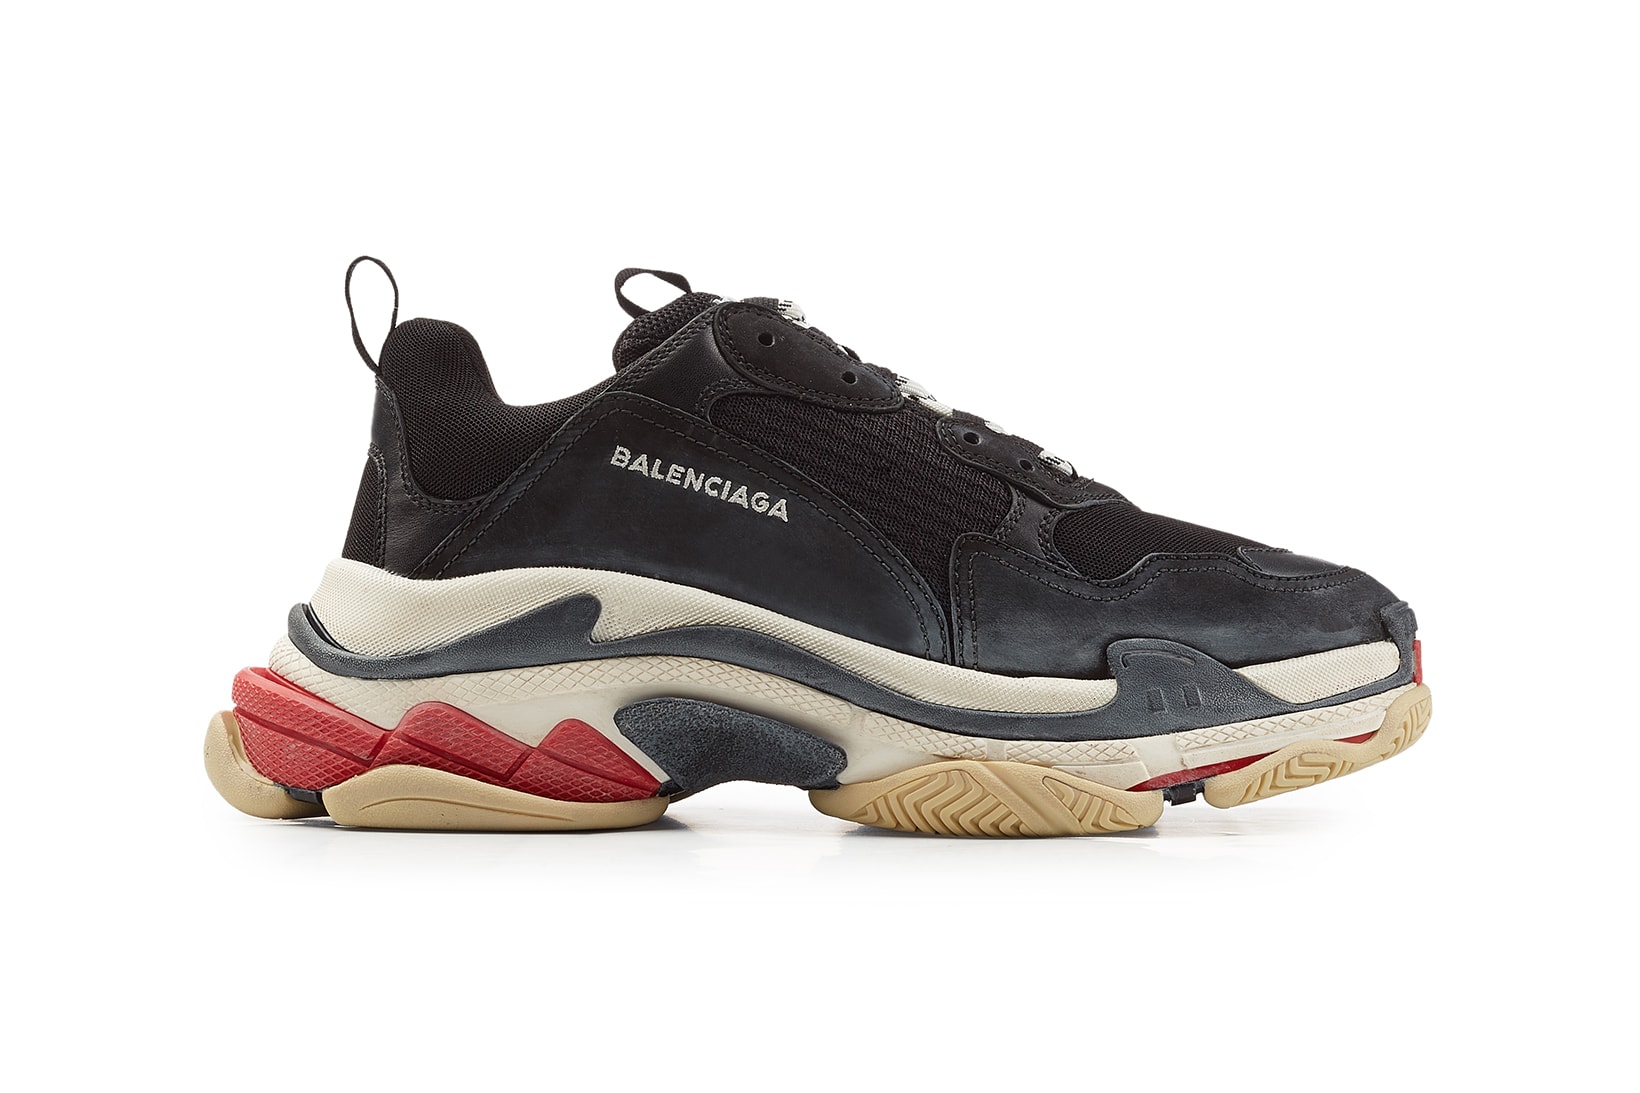 Balenciaga Triple S 2018 new colorways mens womens only exclusive black silver metallic pink where to buy stylebop